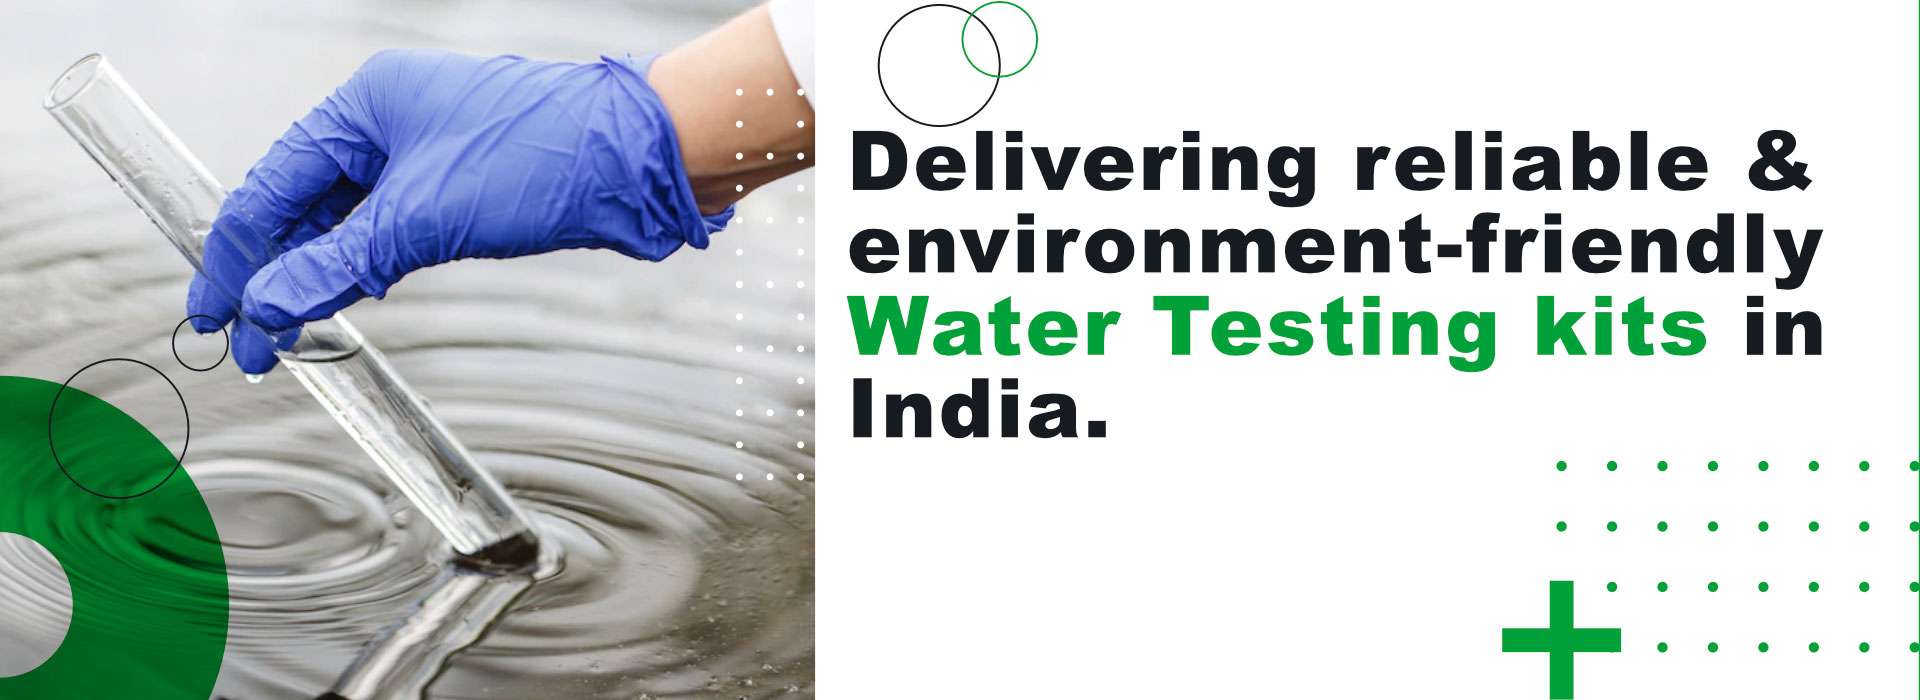 Delivering reliable & environment-friendly water Testing kits in India in Amravati